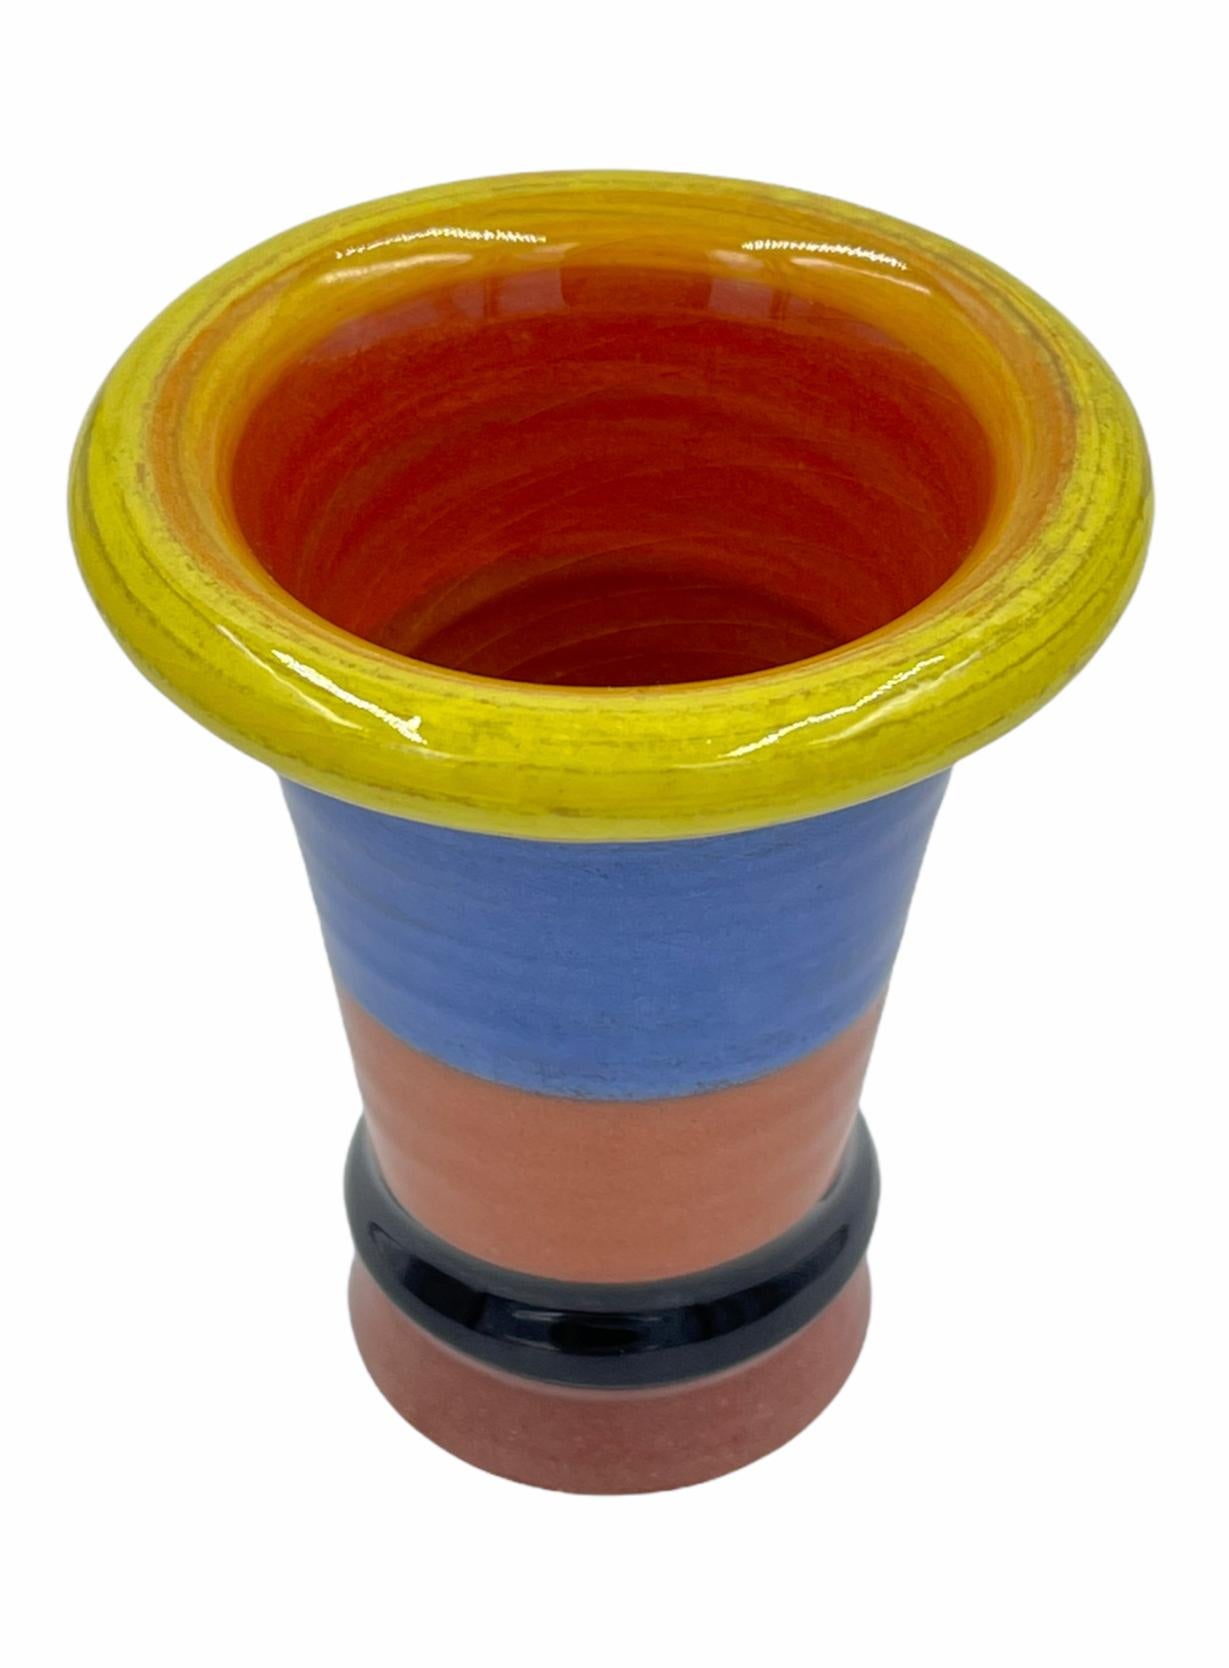 American Peter Shire Expo Vase, 1980 For Sale